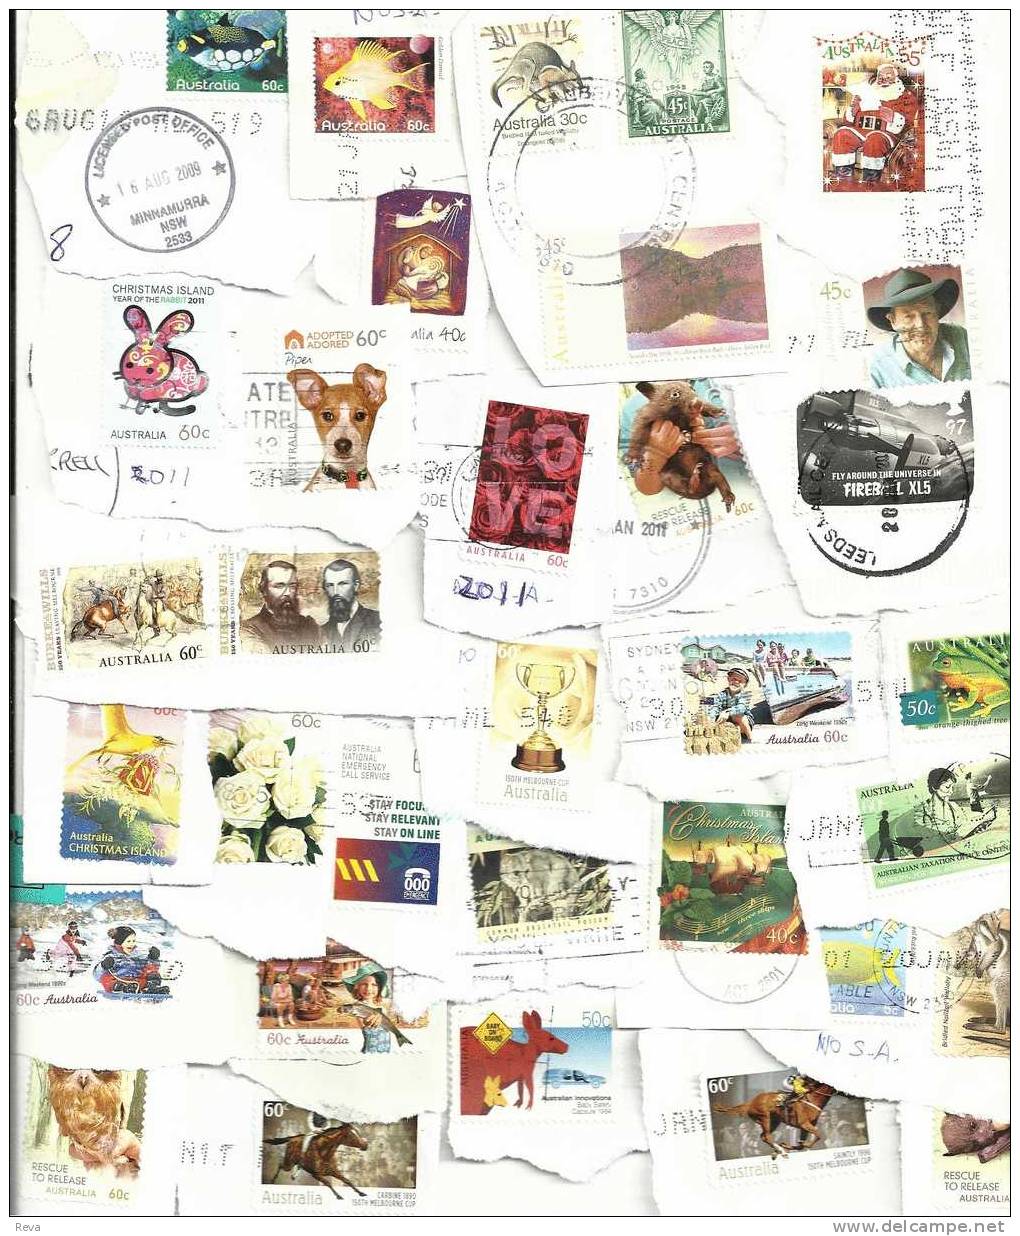 AUSTRALIA LOT40 MIXTURE OF 50+ USED STAMPS SOME 2011 ISSUES INC.CI  &1 UK ETC. BIRD BUTTERFLY ETC.READ DESCRIPTION!! - Lots & Kiloware (mixtures) - Max. 999 Stamps